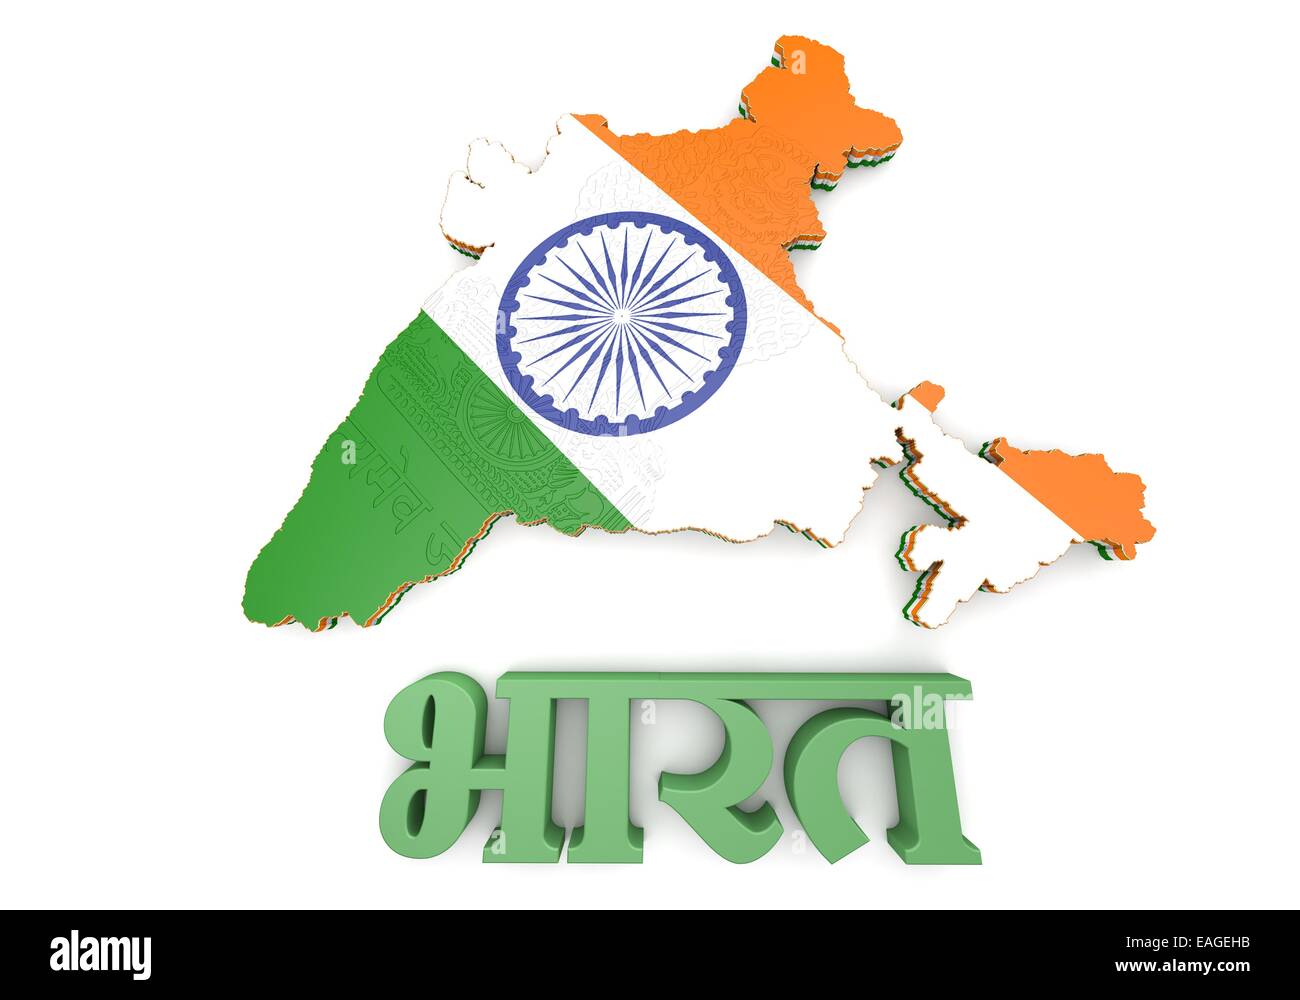 3d Map illustration of India with flag and  coat of arms Stock Photo